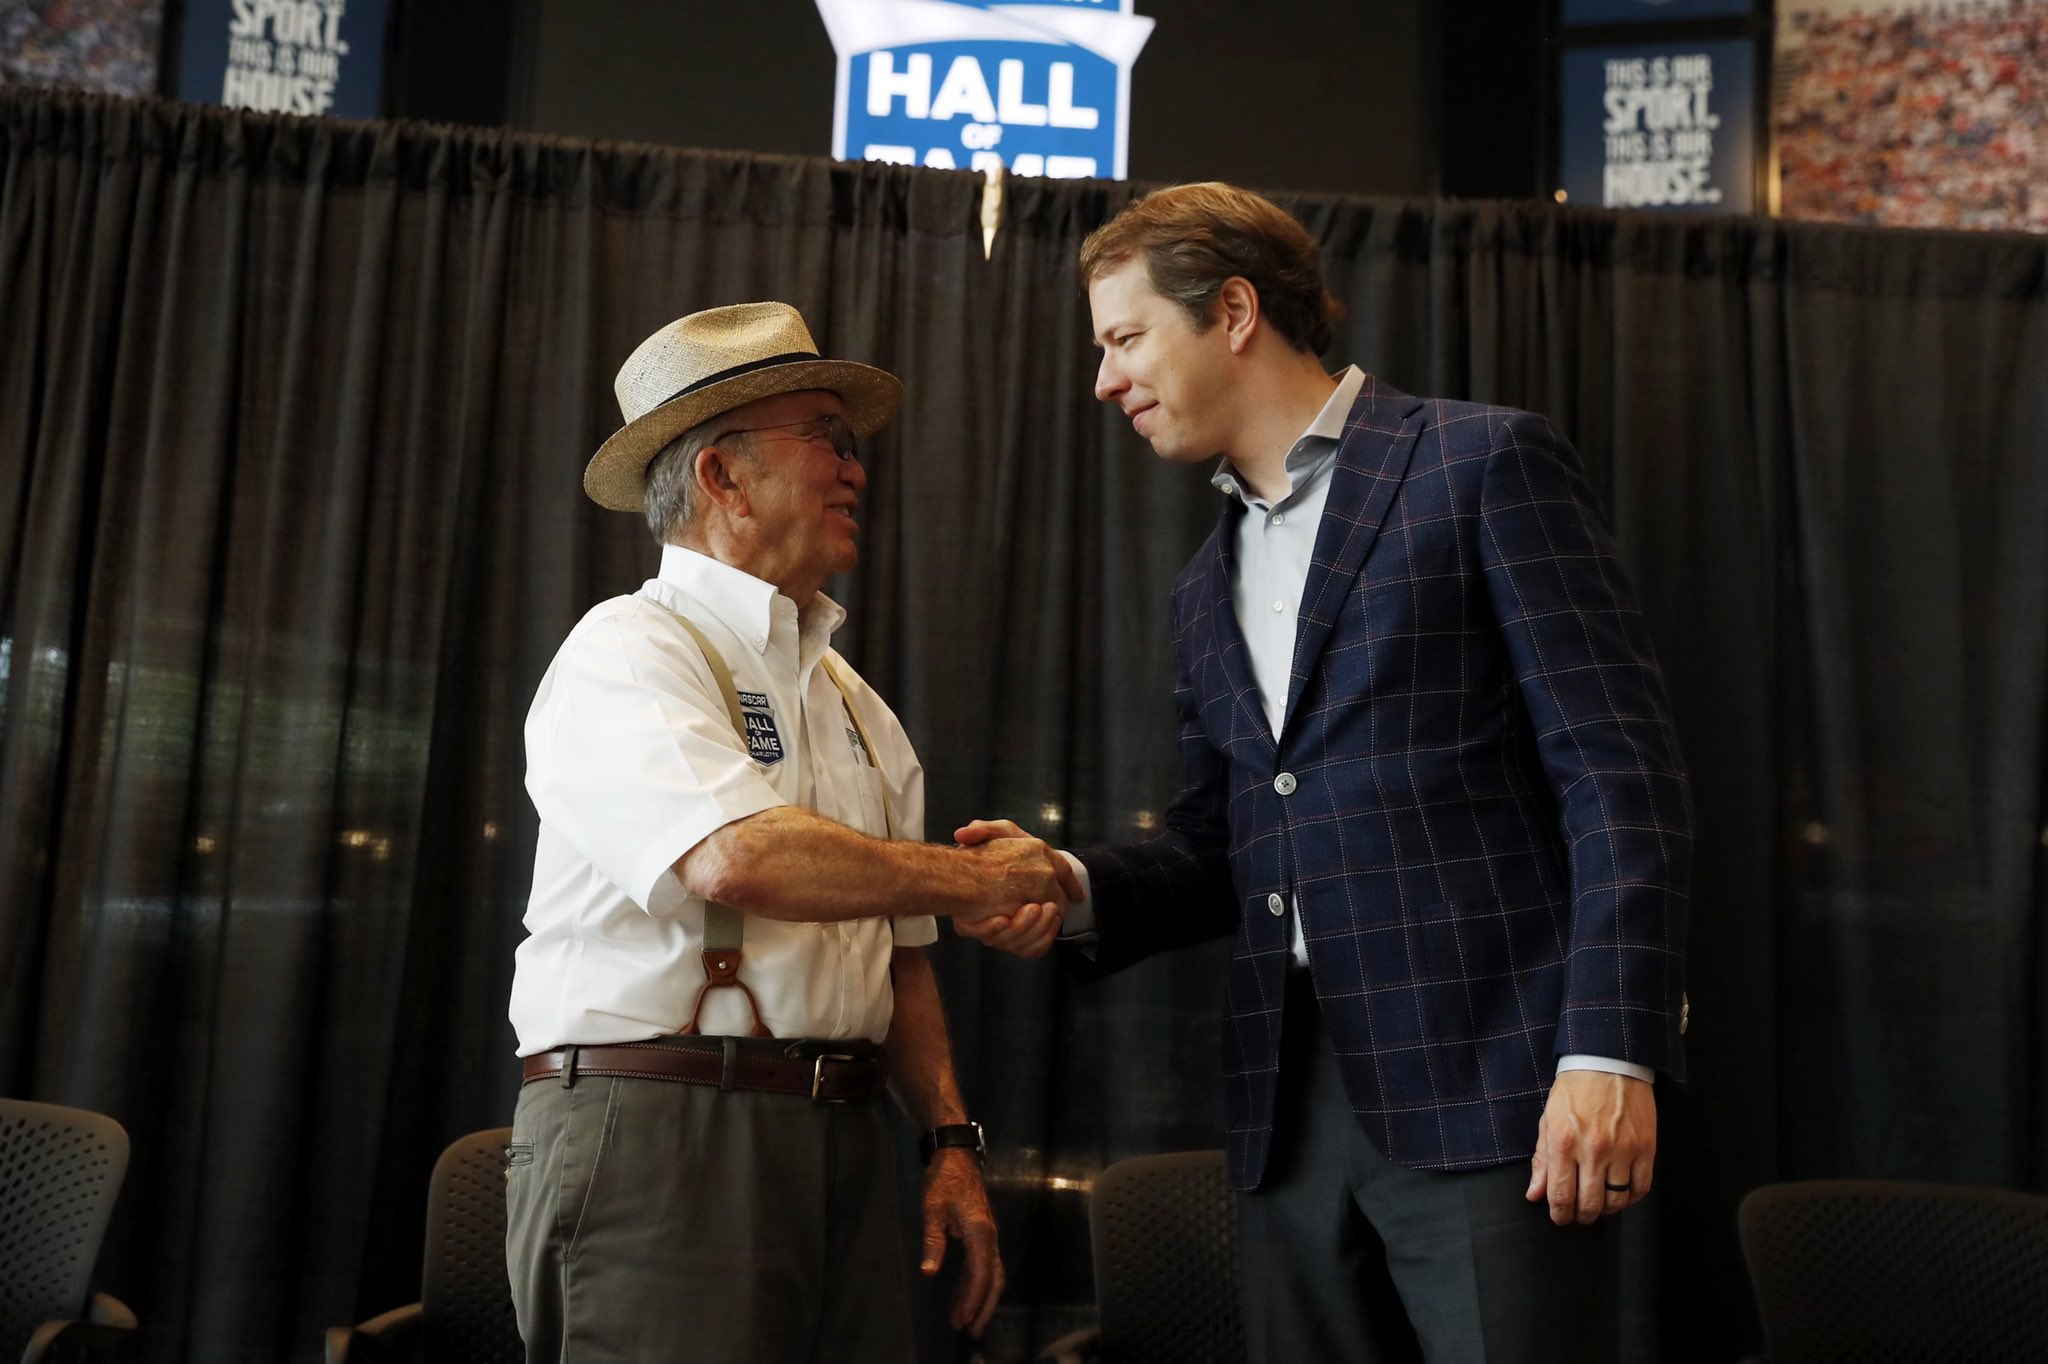 NASCAR Champion Brad Keselowski to Join Forces with Hall of Fame Owner Jack Roush and Roush Fenway Racing